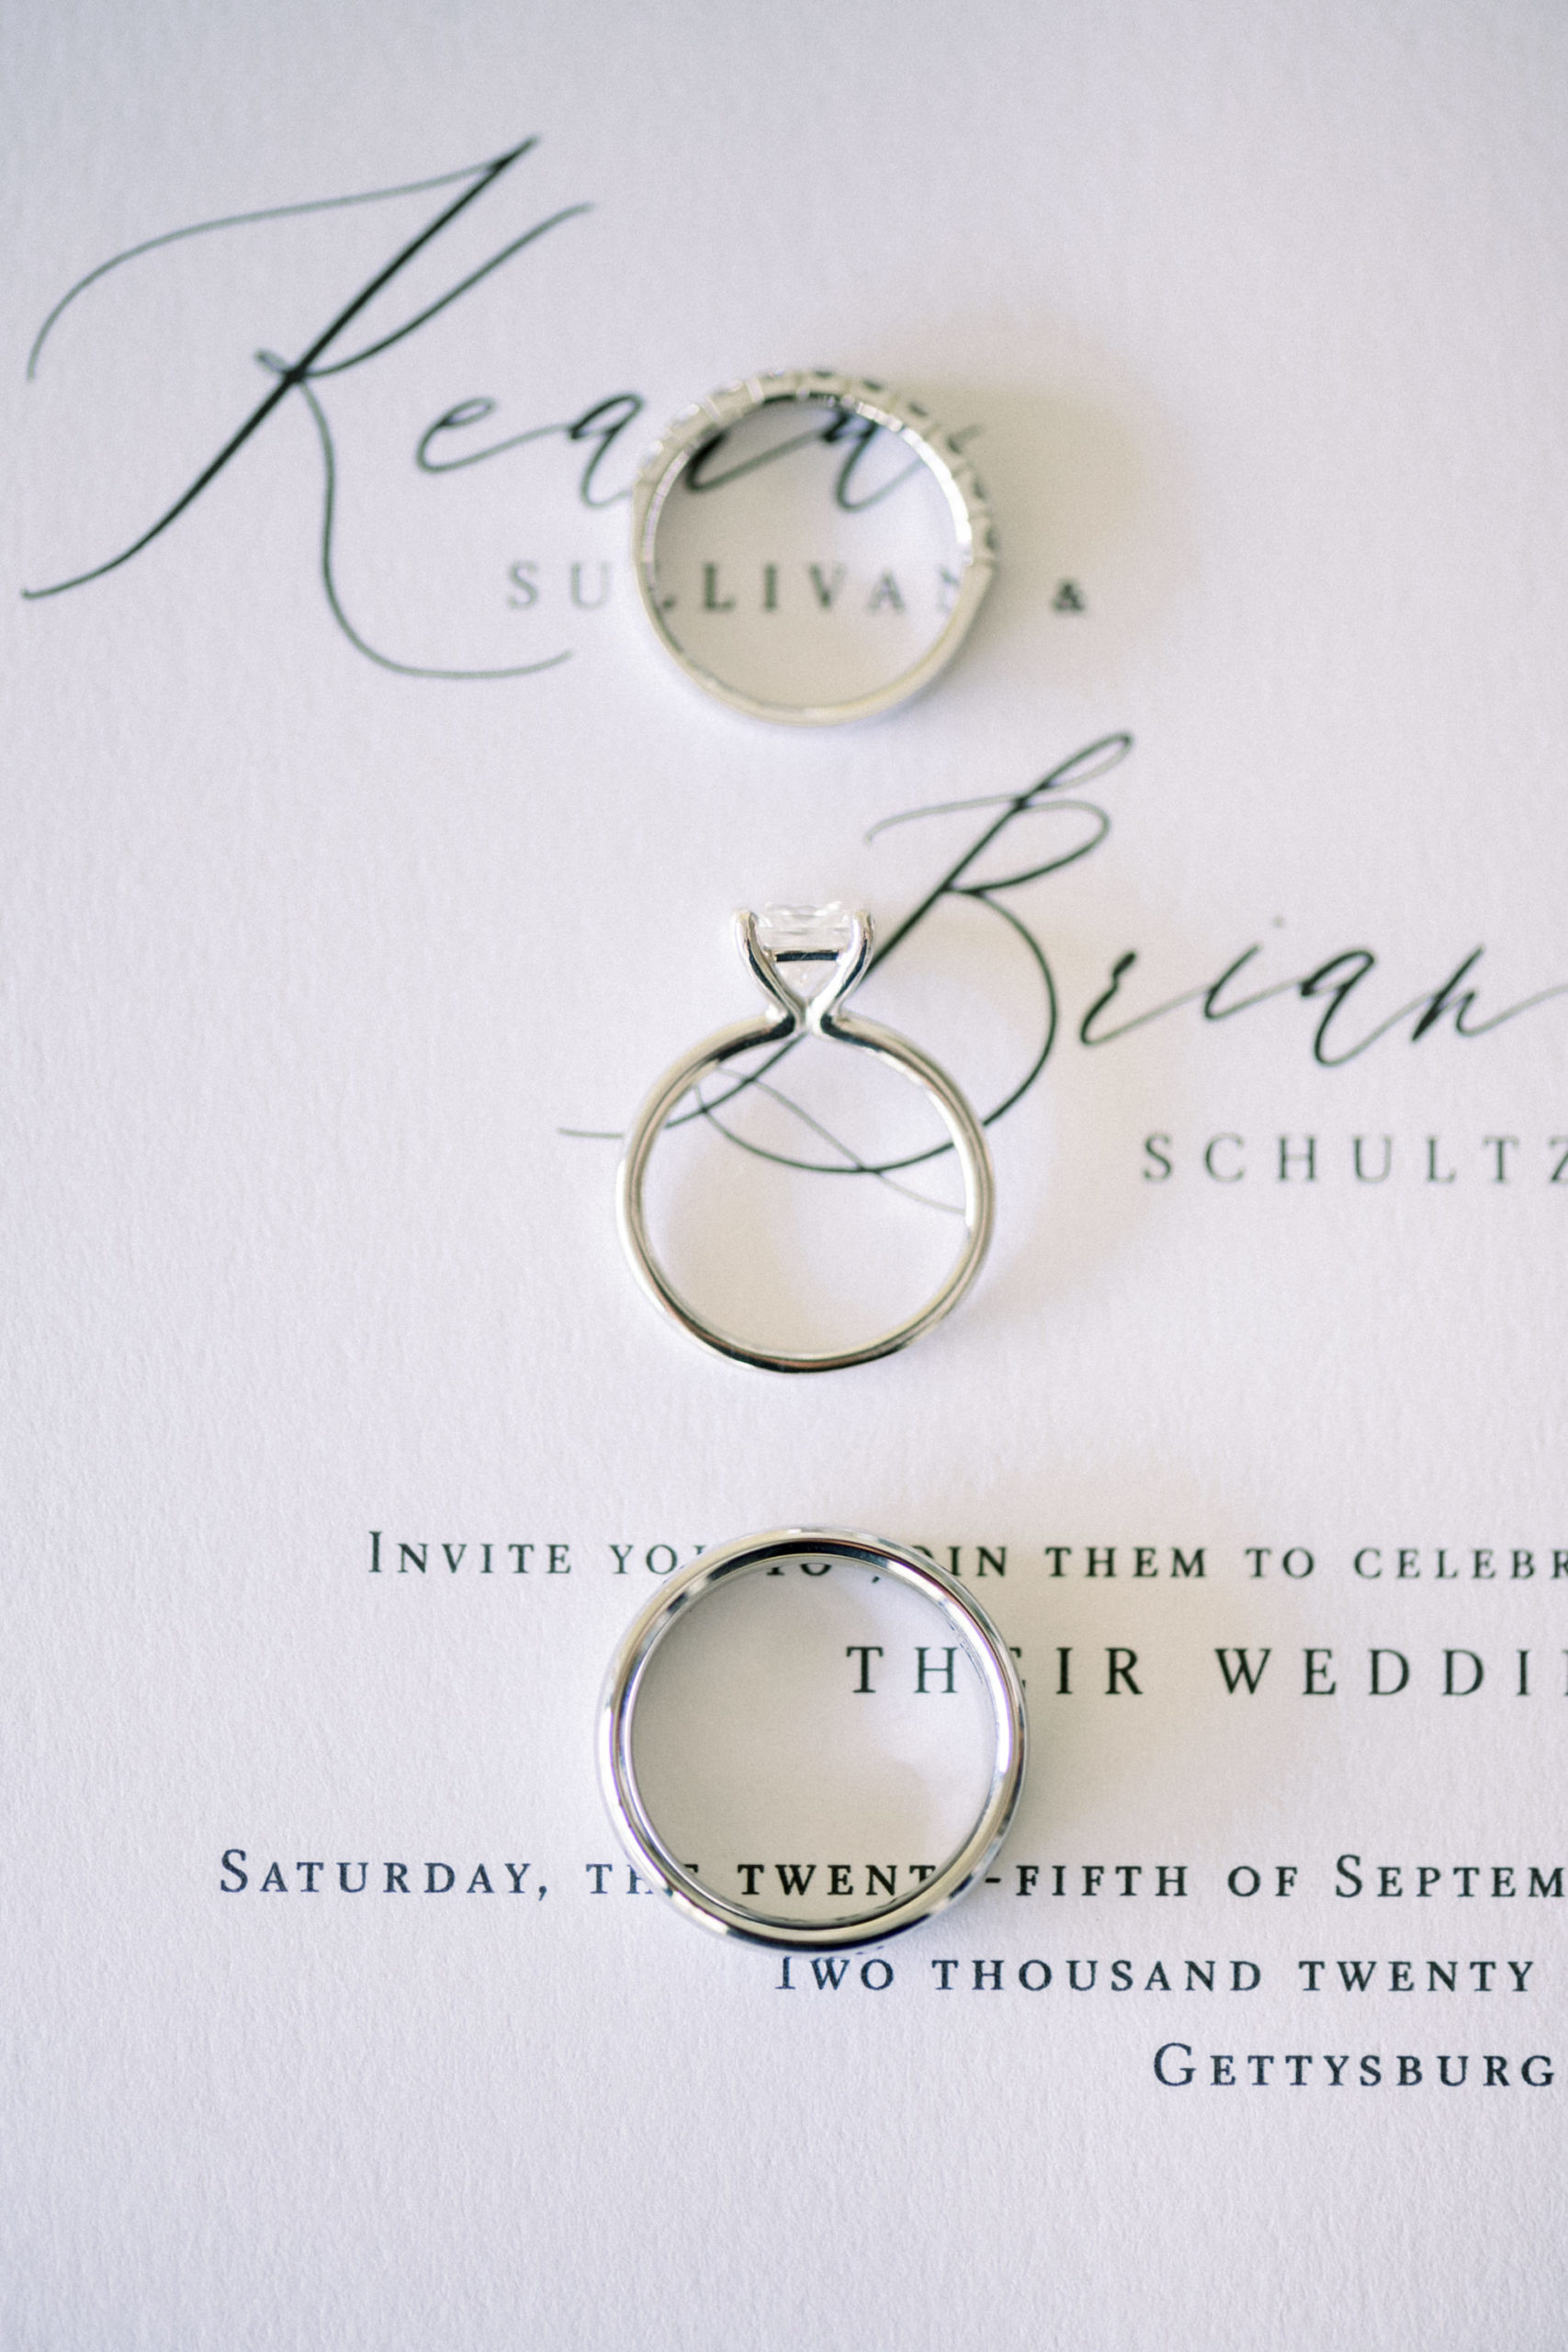 wedding rings and engagement rings laying on a wedding invitation